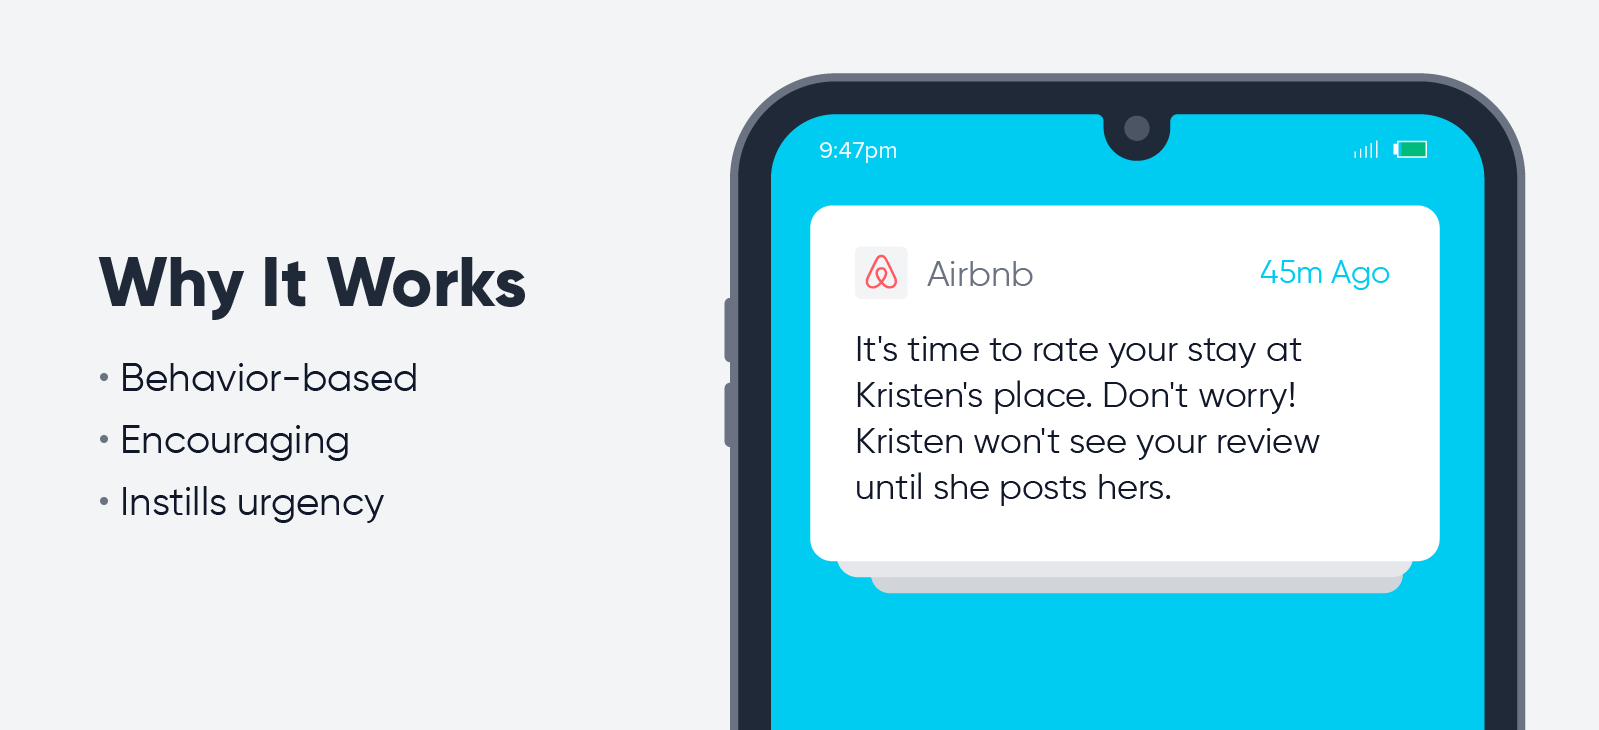 26-airbnb-push-notification-best-practices